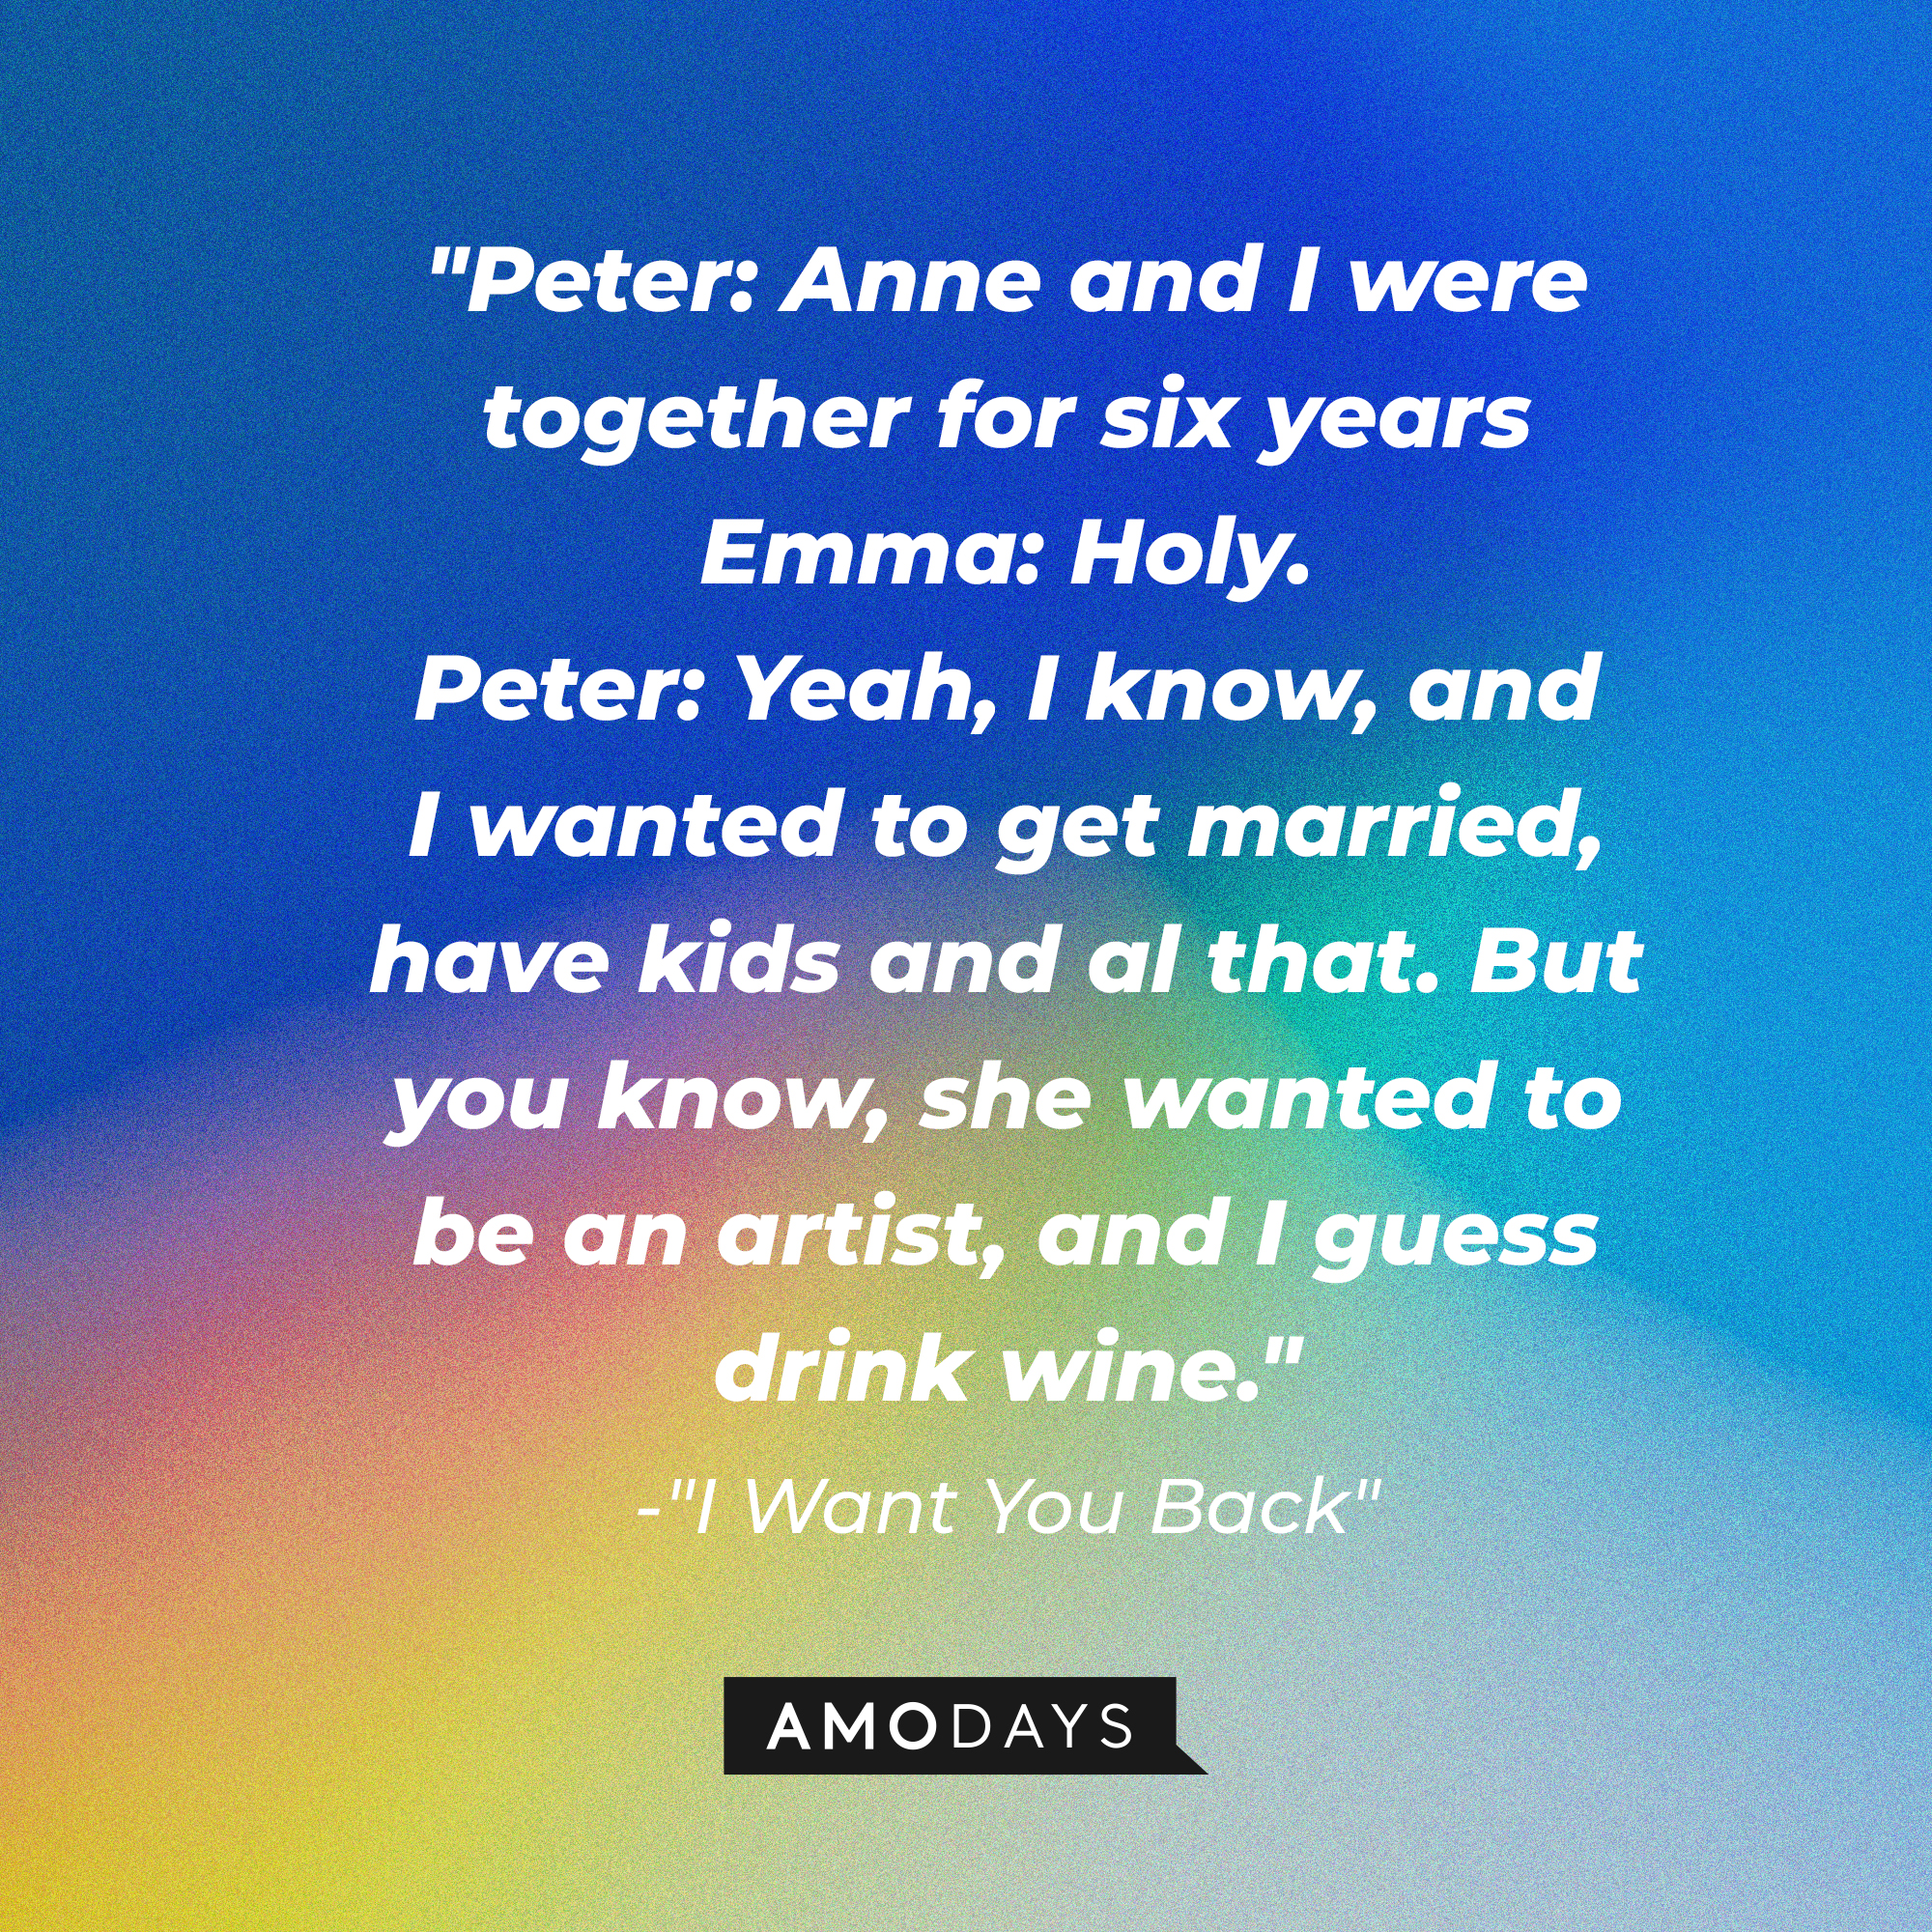 Emma and Peter's dialogue in "I Want You Back:" "Peter: Anne and I were together for six years  ; Emma: Holy. ; Peter: Yeah, I know, and I wanted to get married, have kids and al that. But you know, she wanted to be an artist, and I guess drink wine." | Source: AmoDays